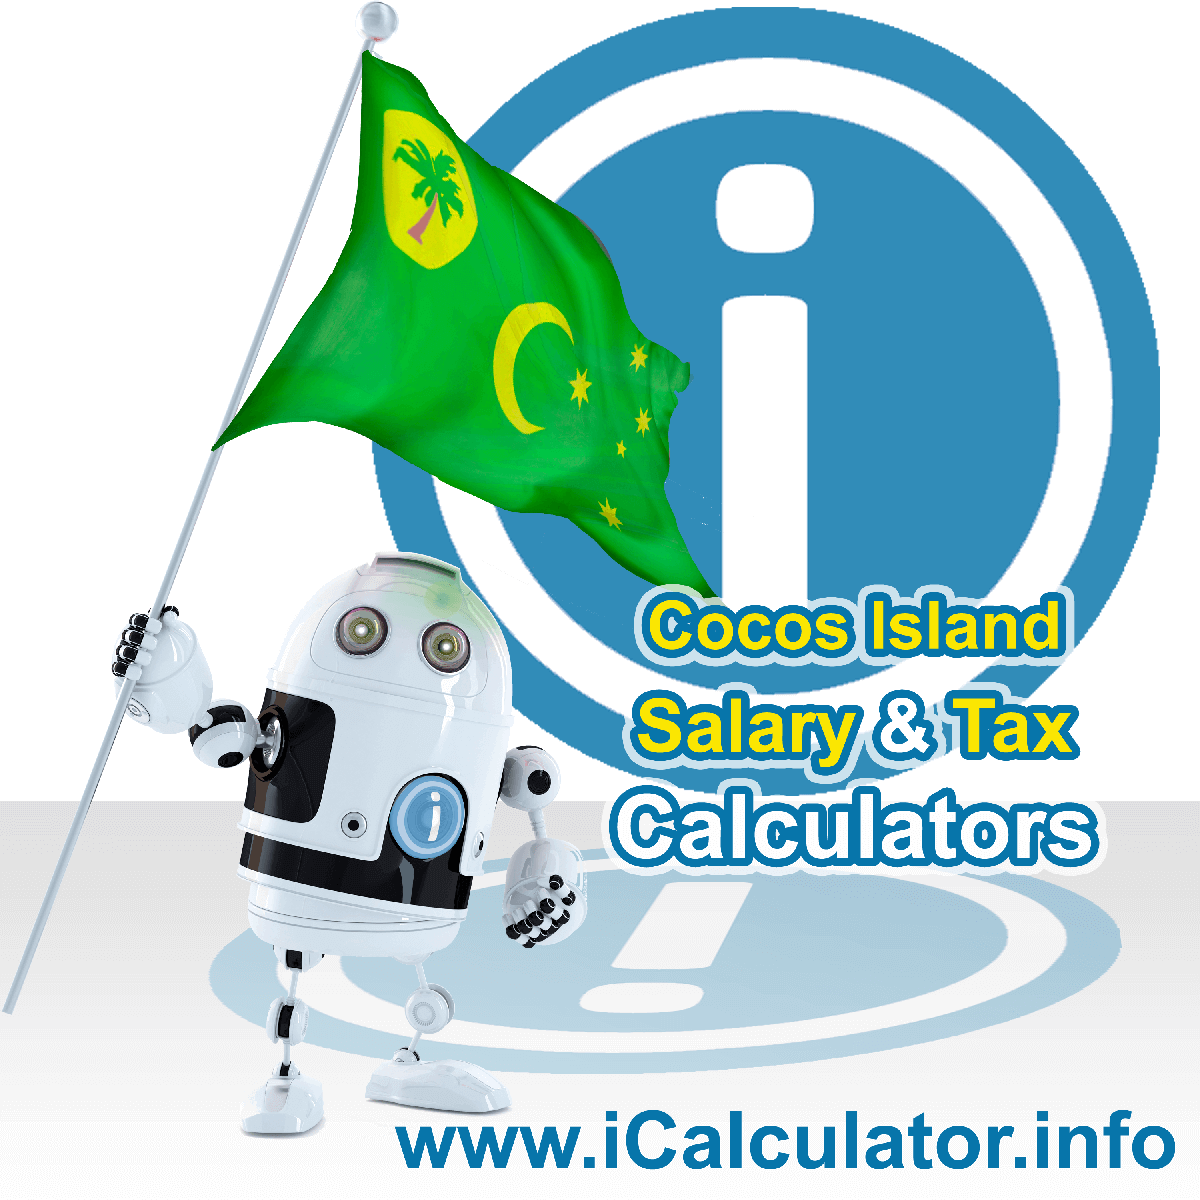 Cocos Islands Wage Calculator. This image shows the Cocos Islands flag and information relating to the tax formula for the Cocos Islands Tax Calculator